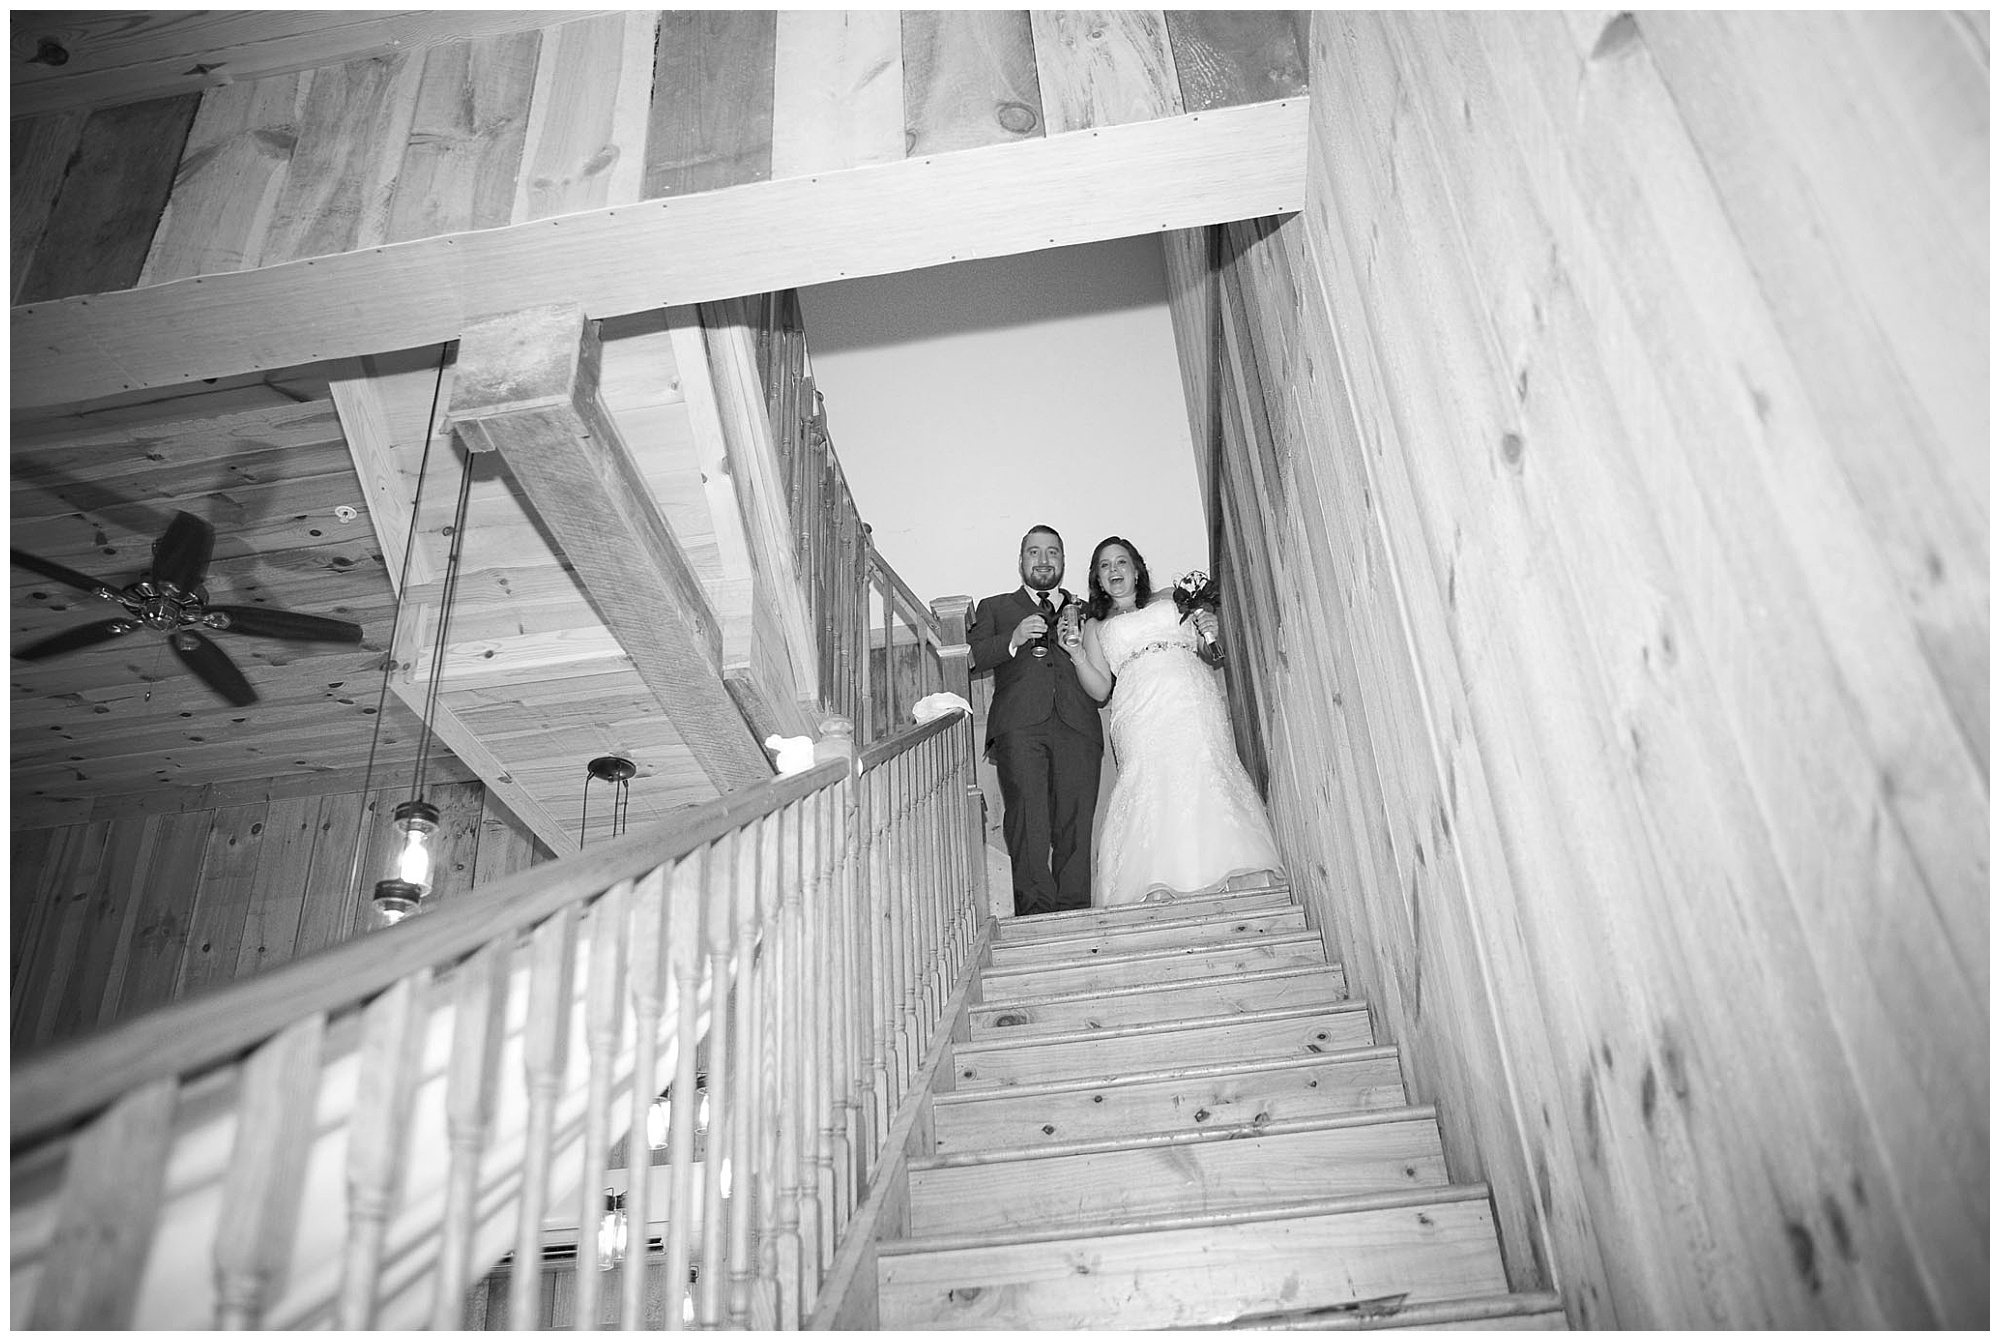 Bride and grrom atop the venue stairway awaiting thier introduction to the reception.